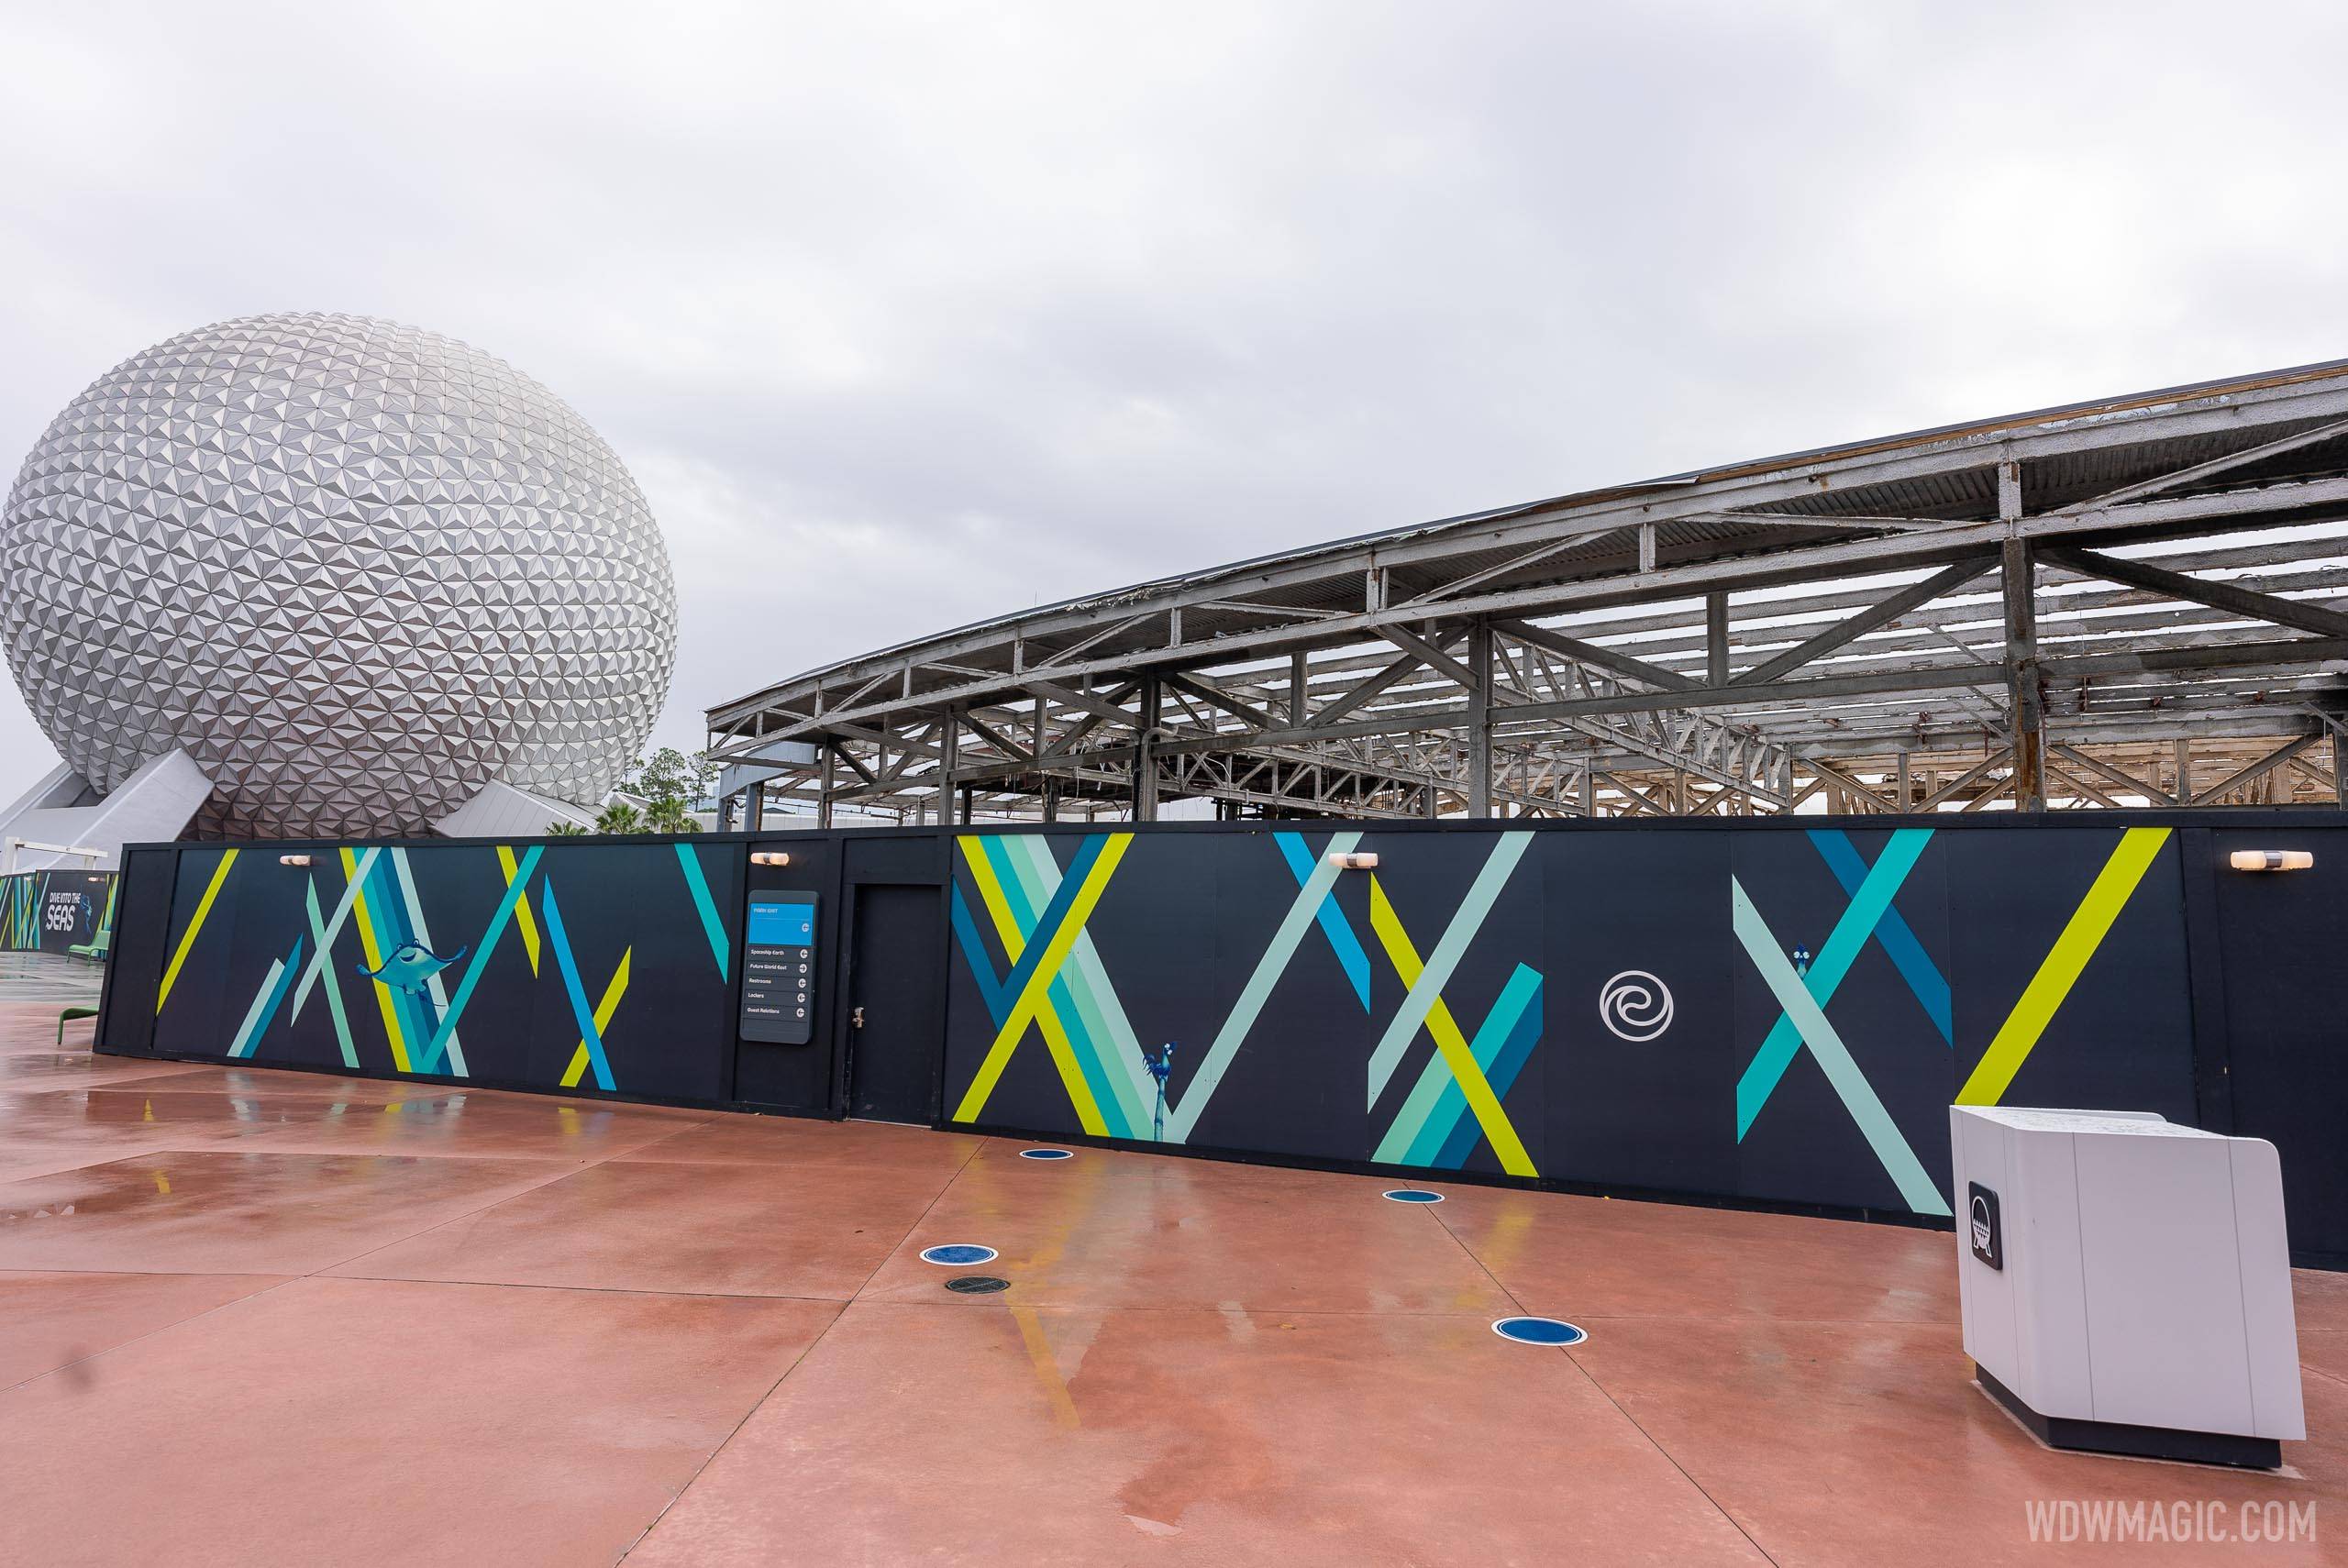 EPCOT Innoventions West demolition - February 17 2021